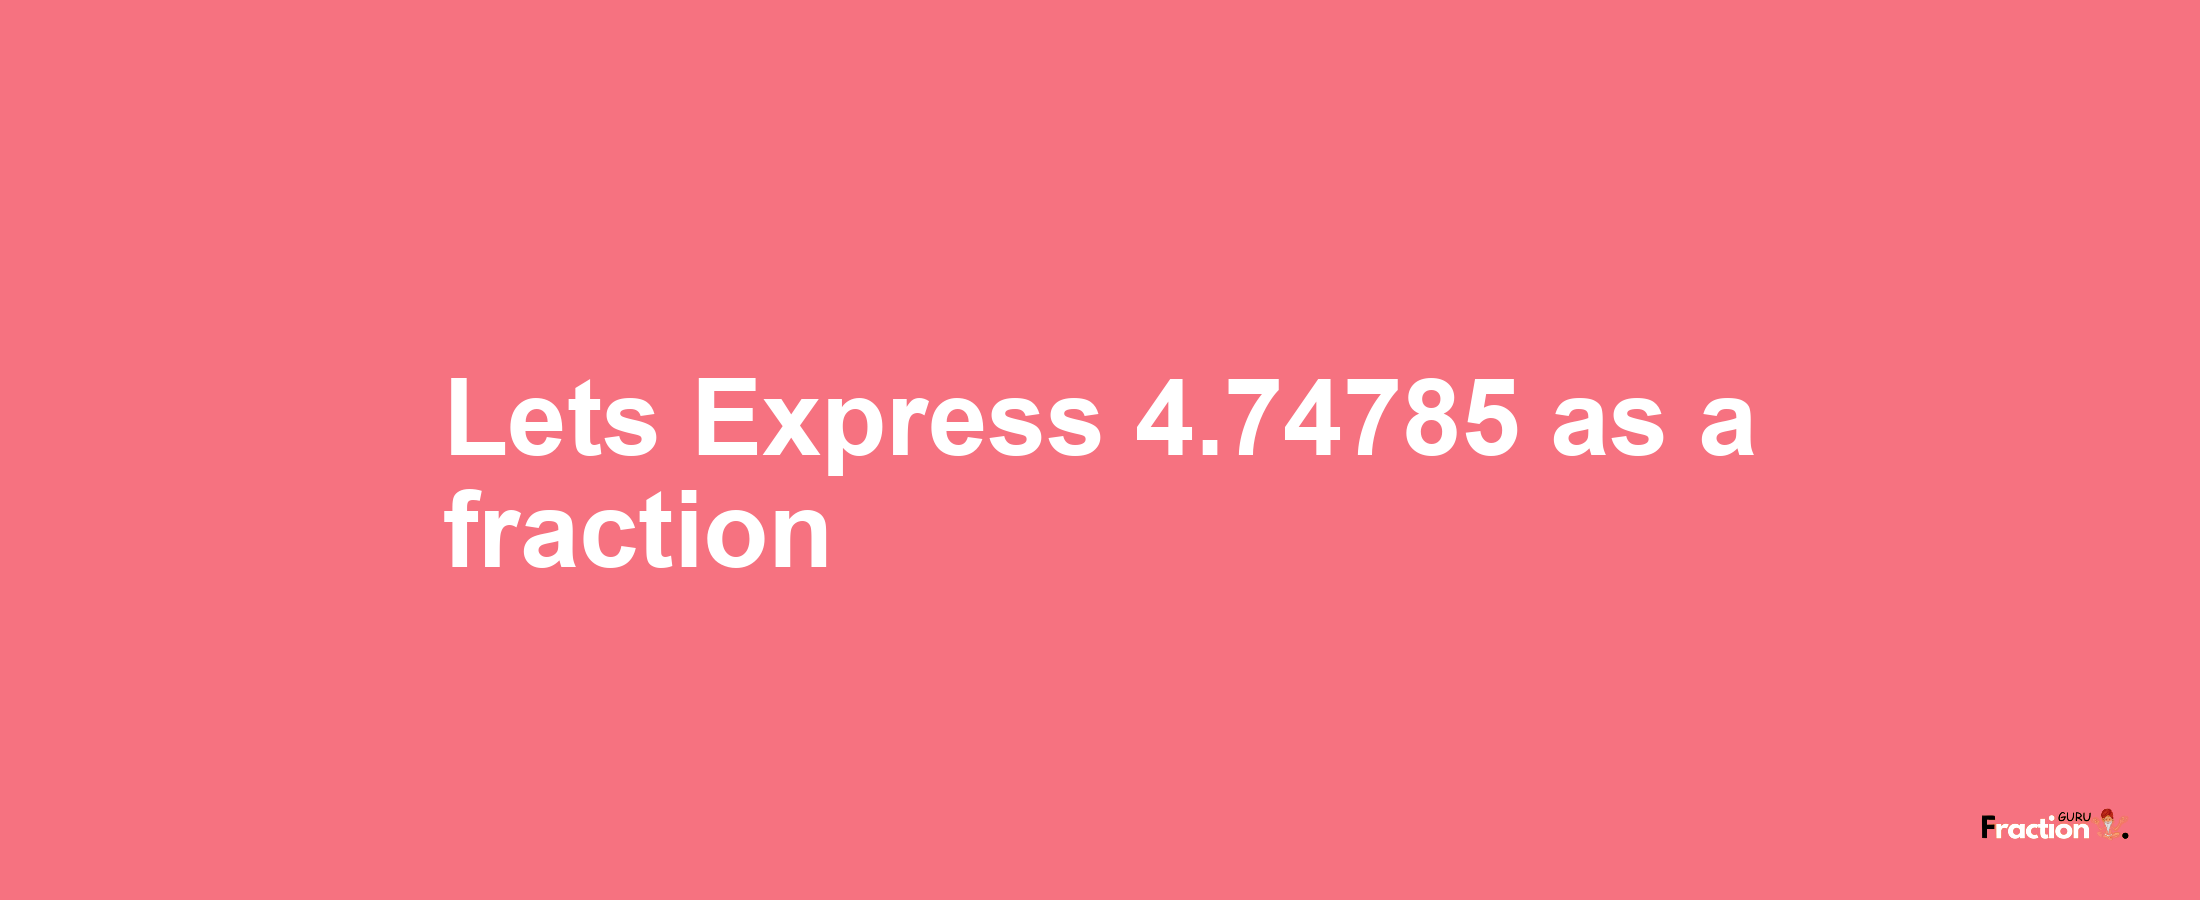 Lets Express 4.74785 as afraction